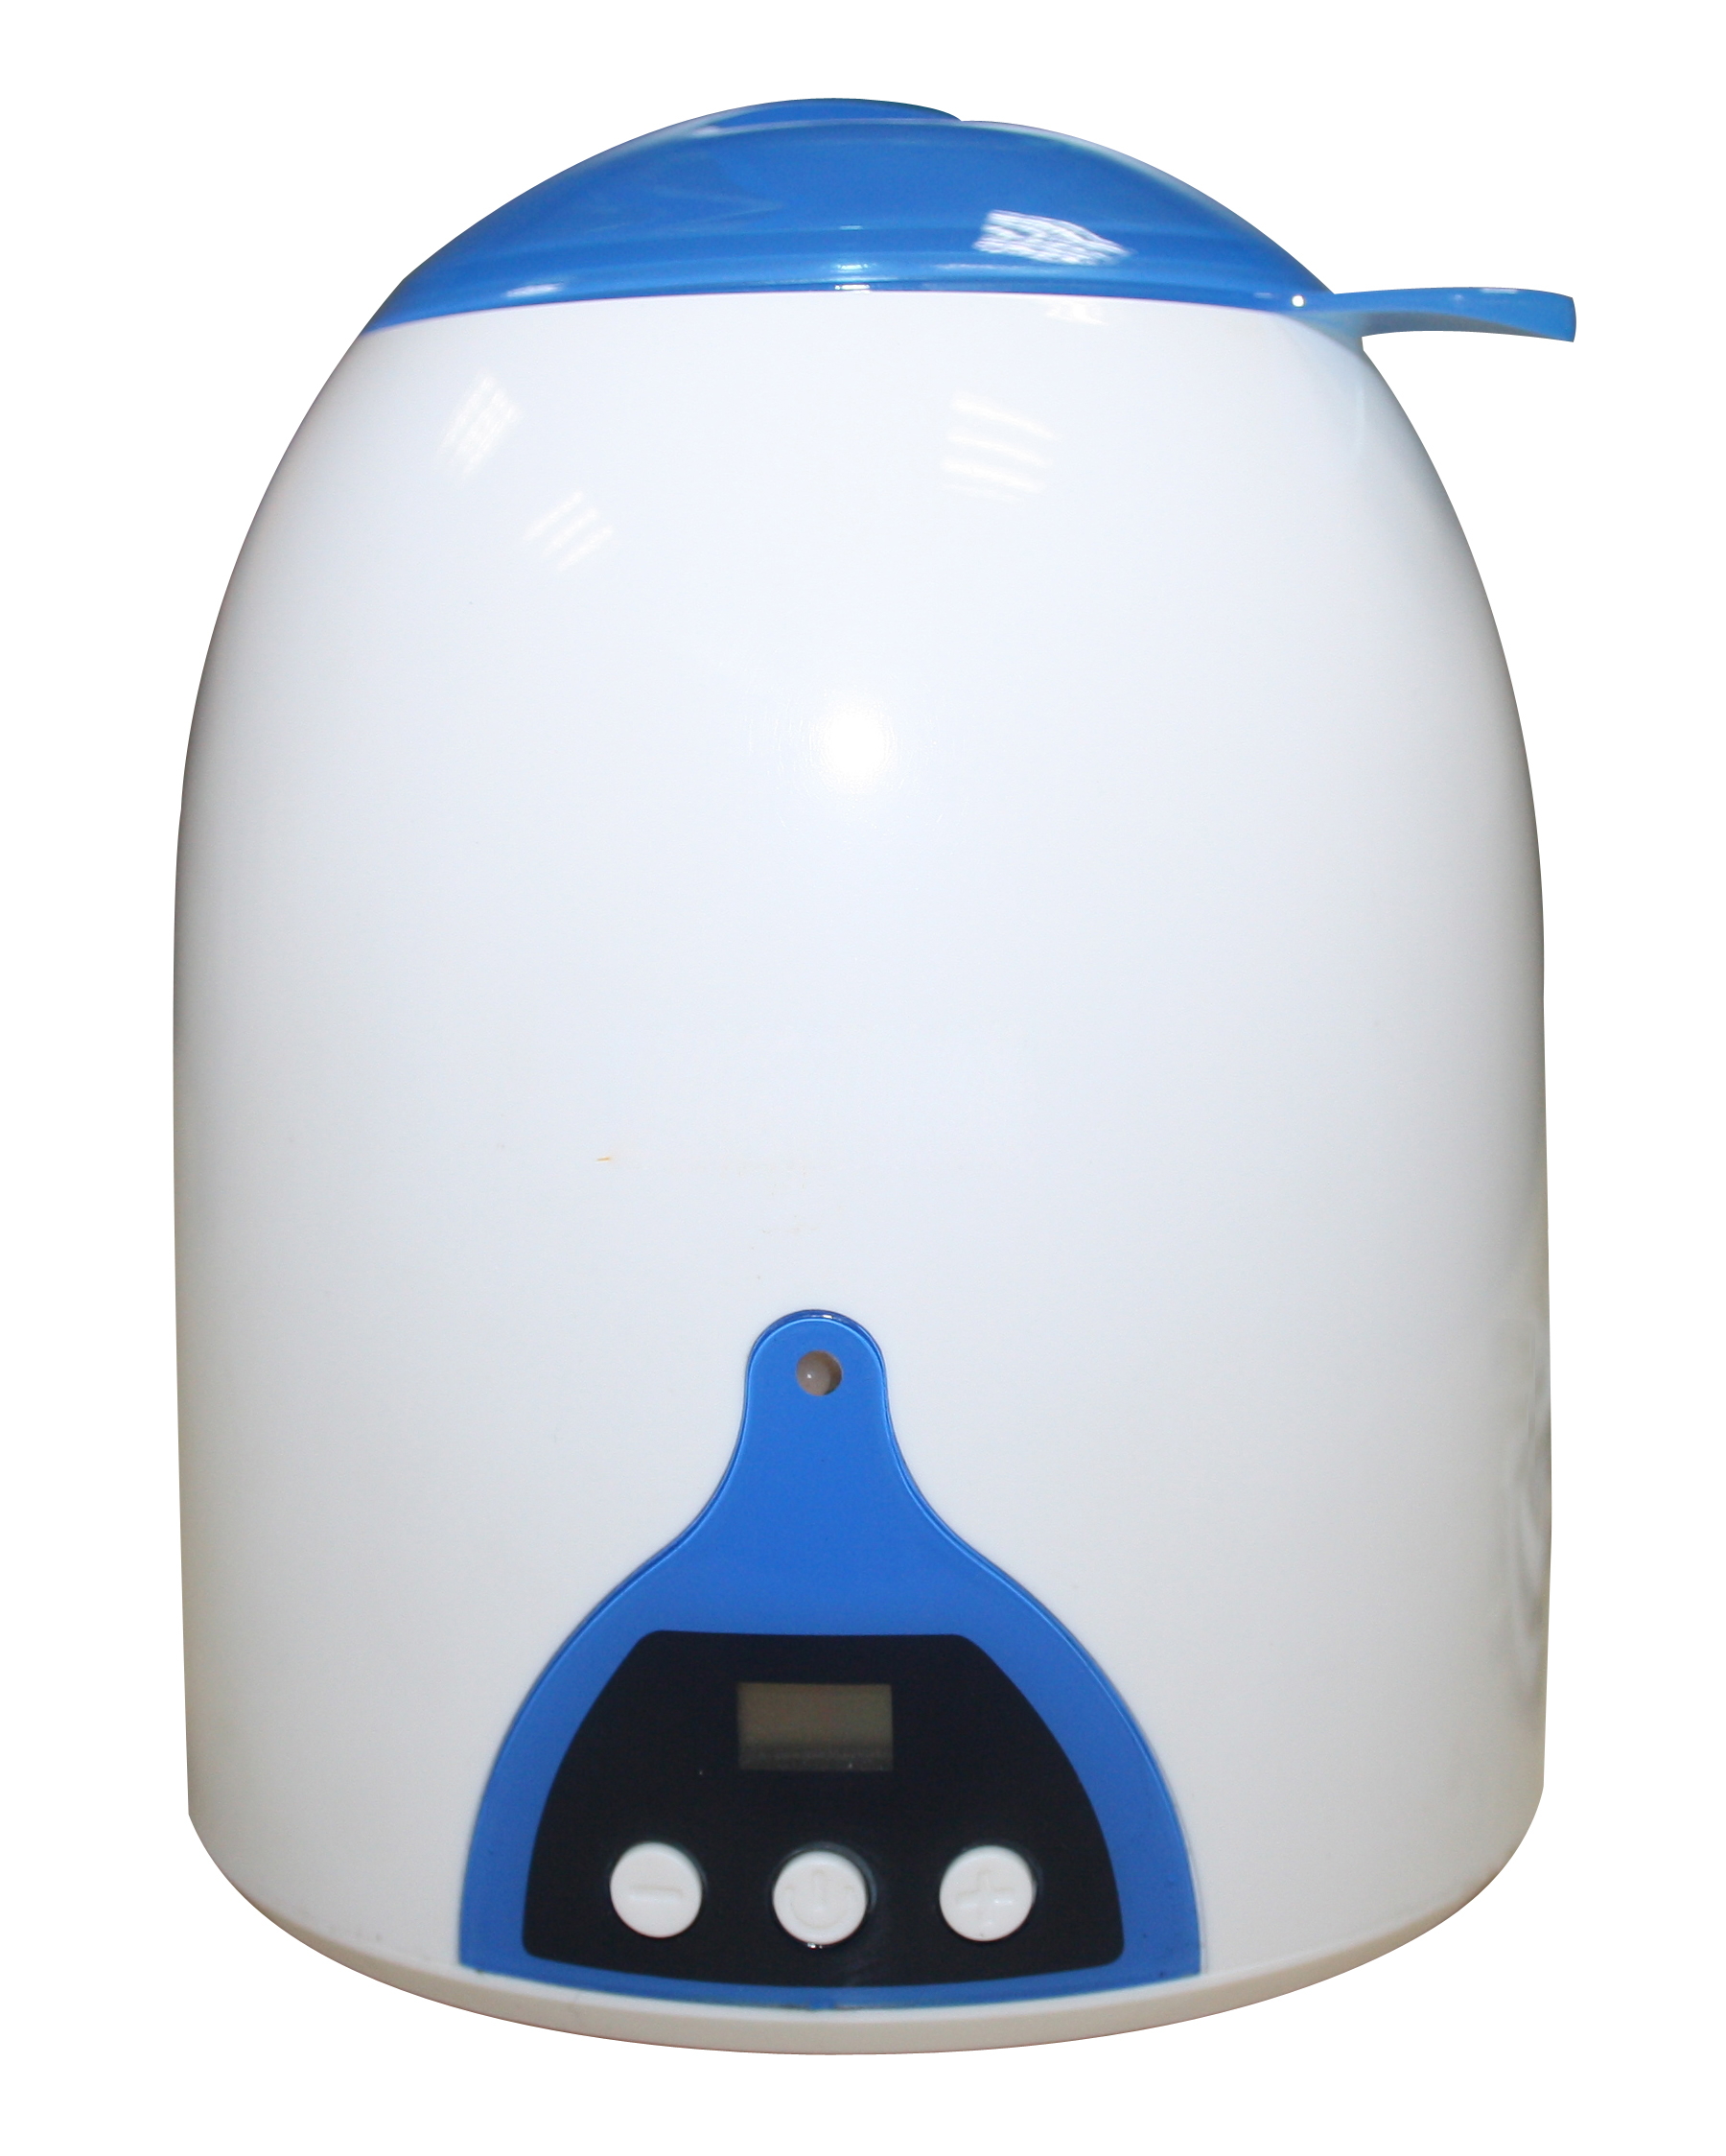 BPA free portable electric insulated baby bottle warmer AH-918